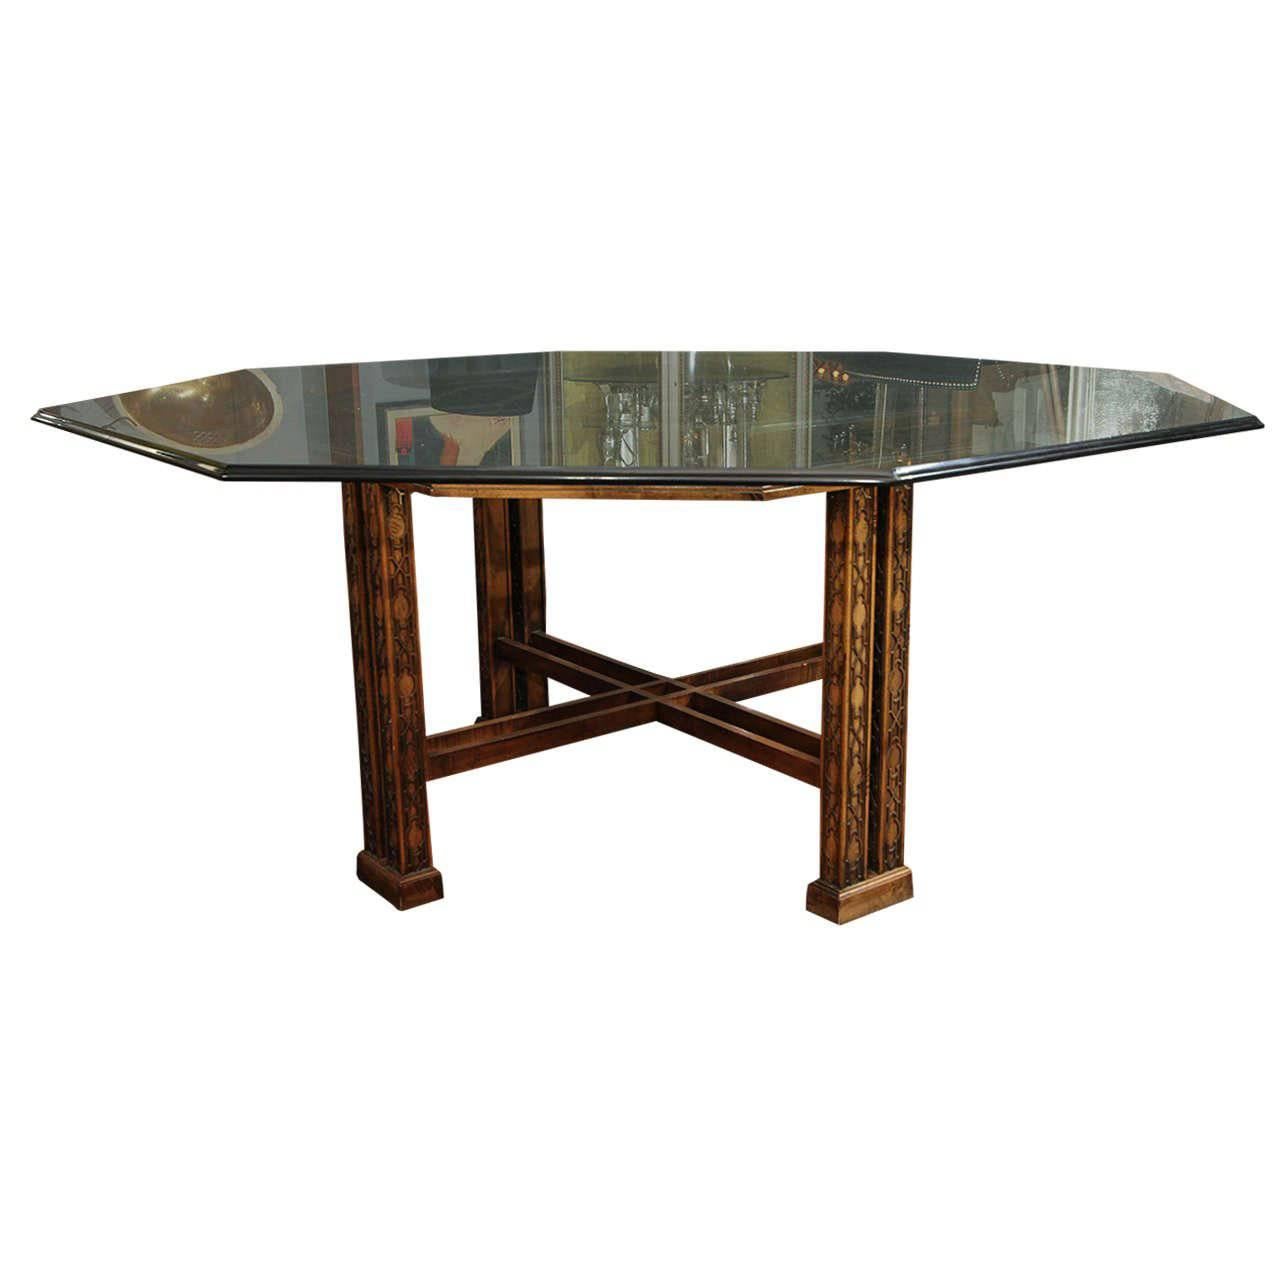 Table octogonale chinoiseries Maguire